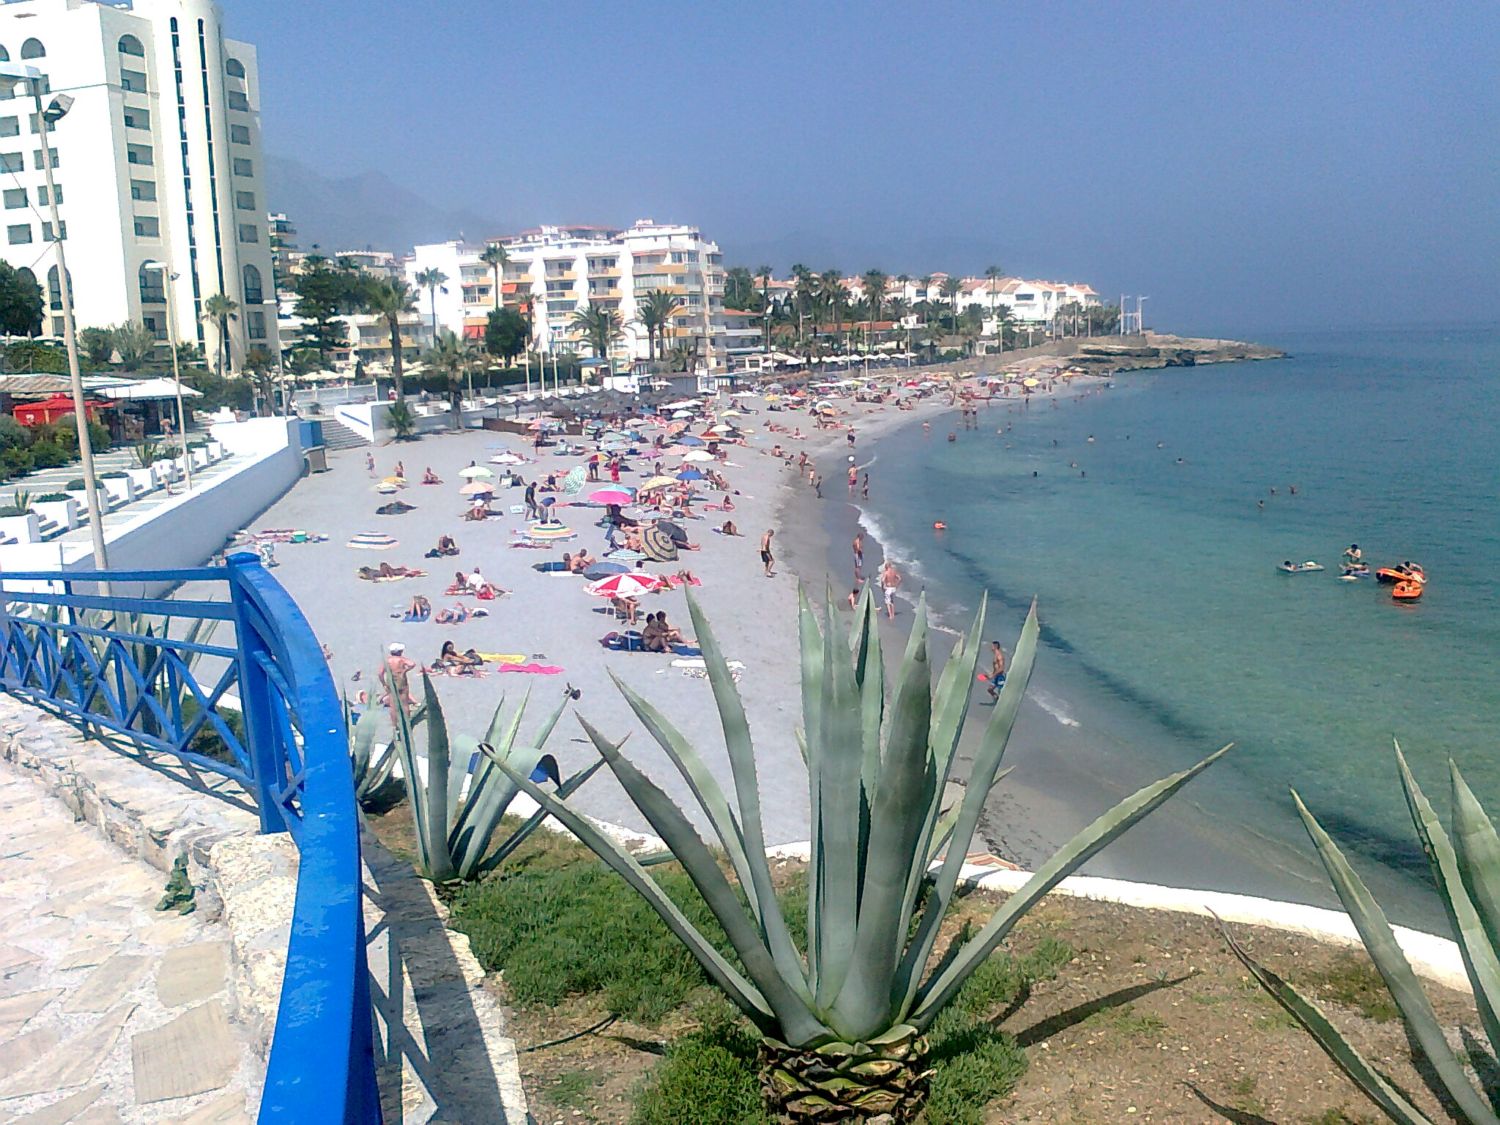 APARTMENT CAPACITY FOUR PEOPLE 40 METERS FROM THE TORRECILLAS BEACH